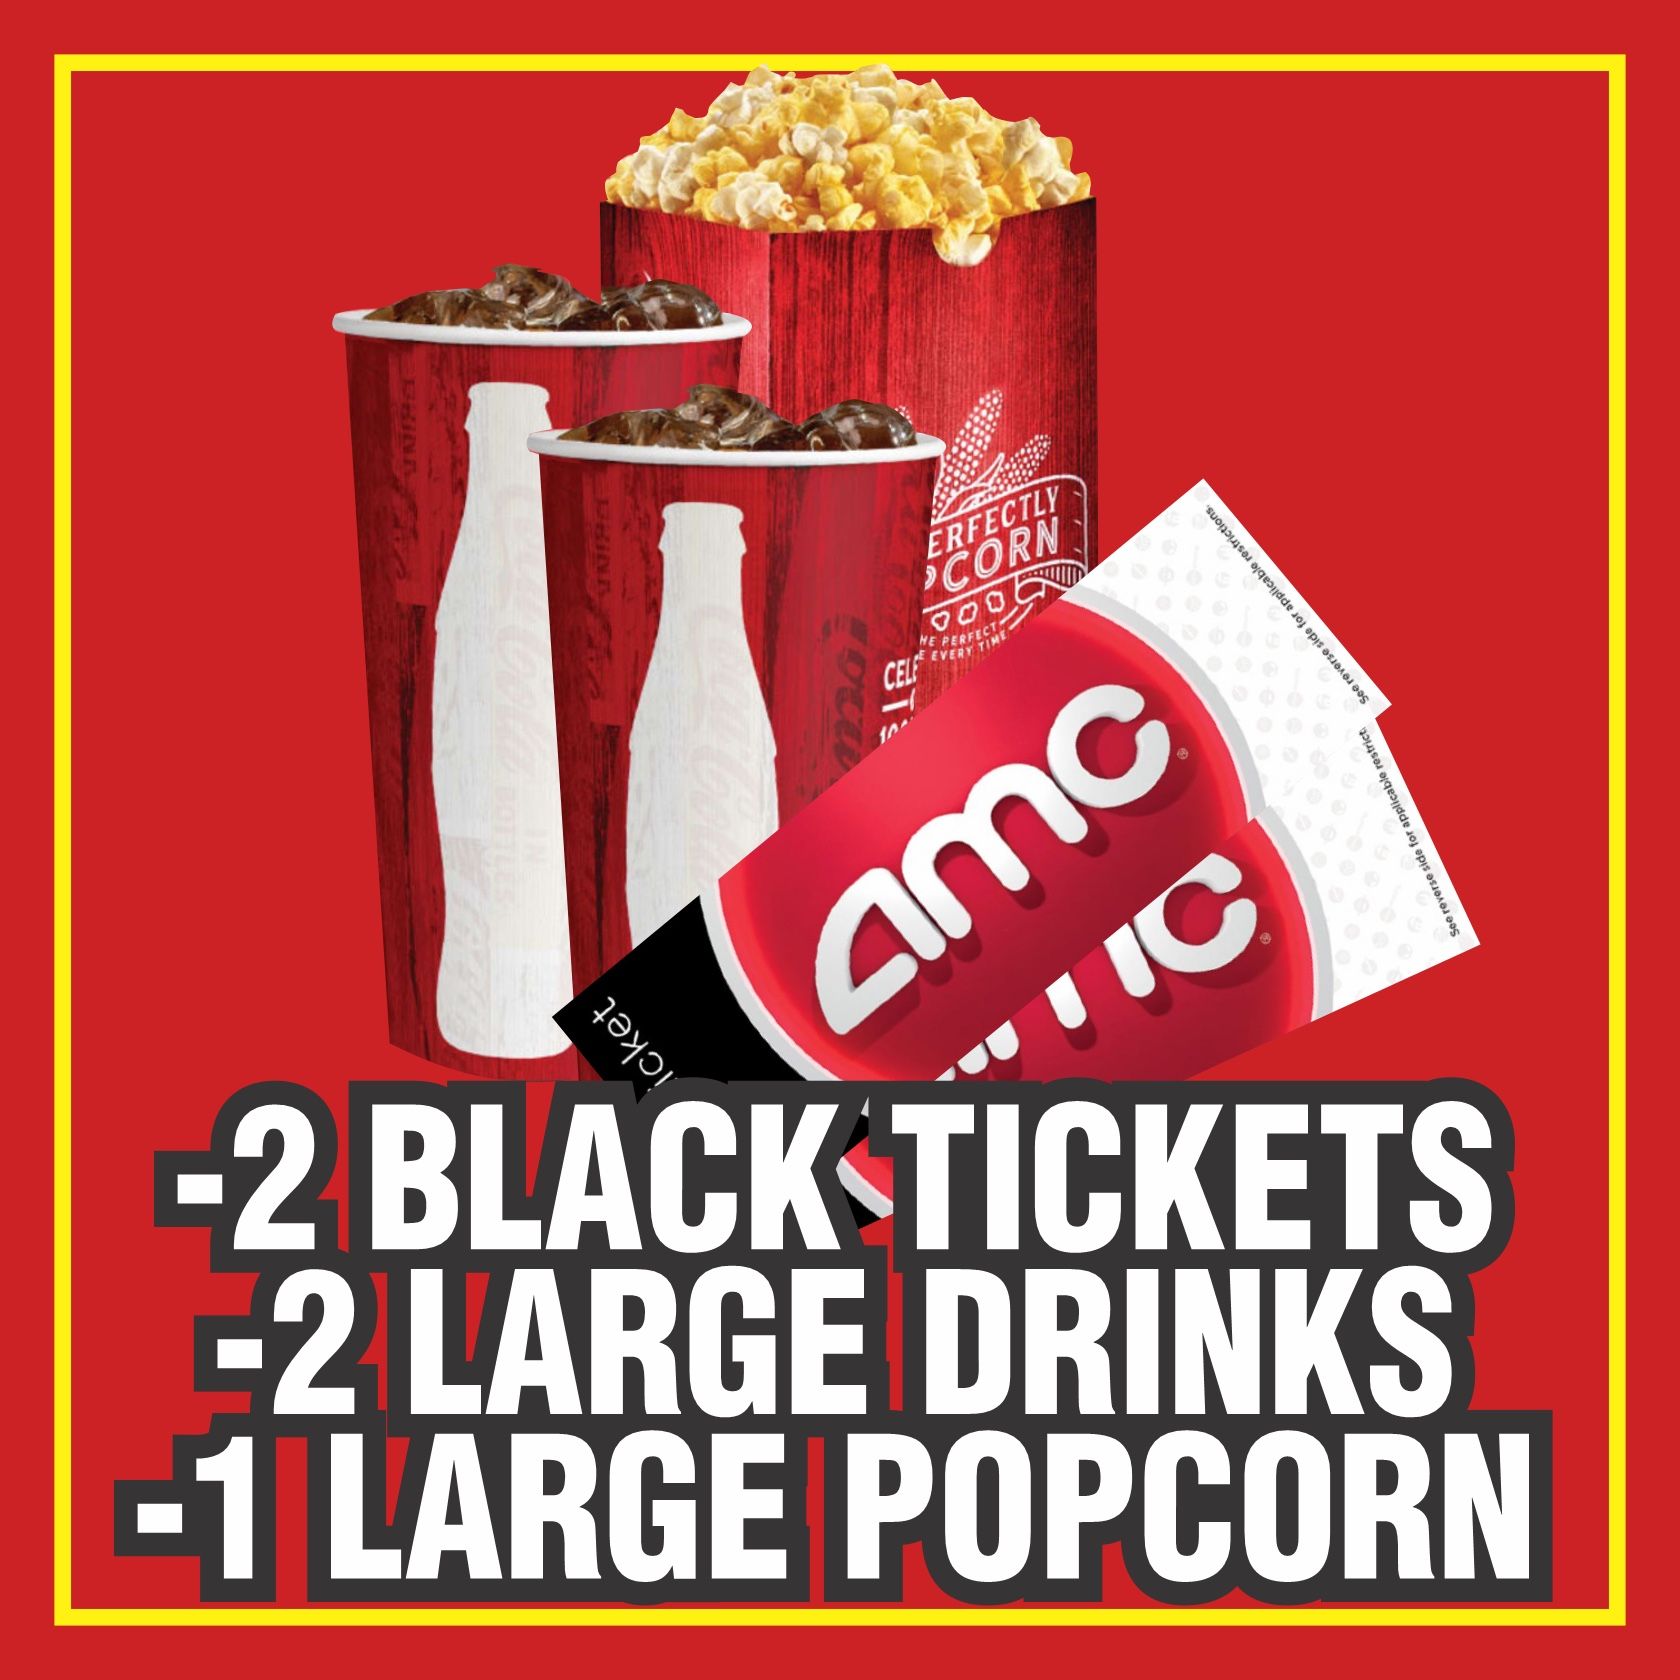 AMC Theaters Tickets Combo